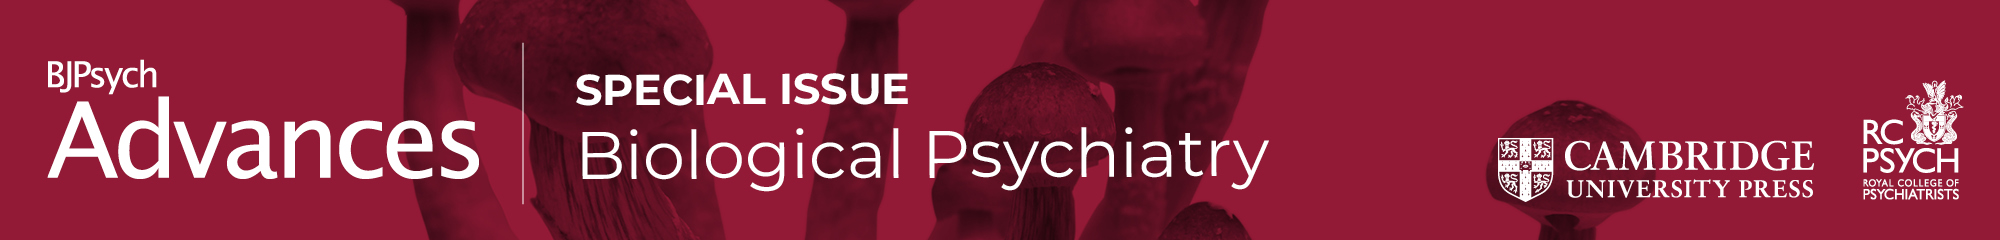 BJPsych Advances Special Issue Biological Psychiatry March 2023